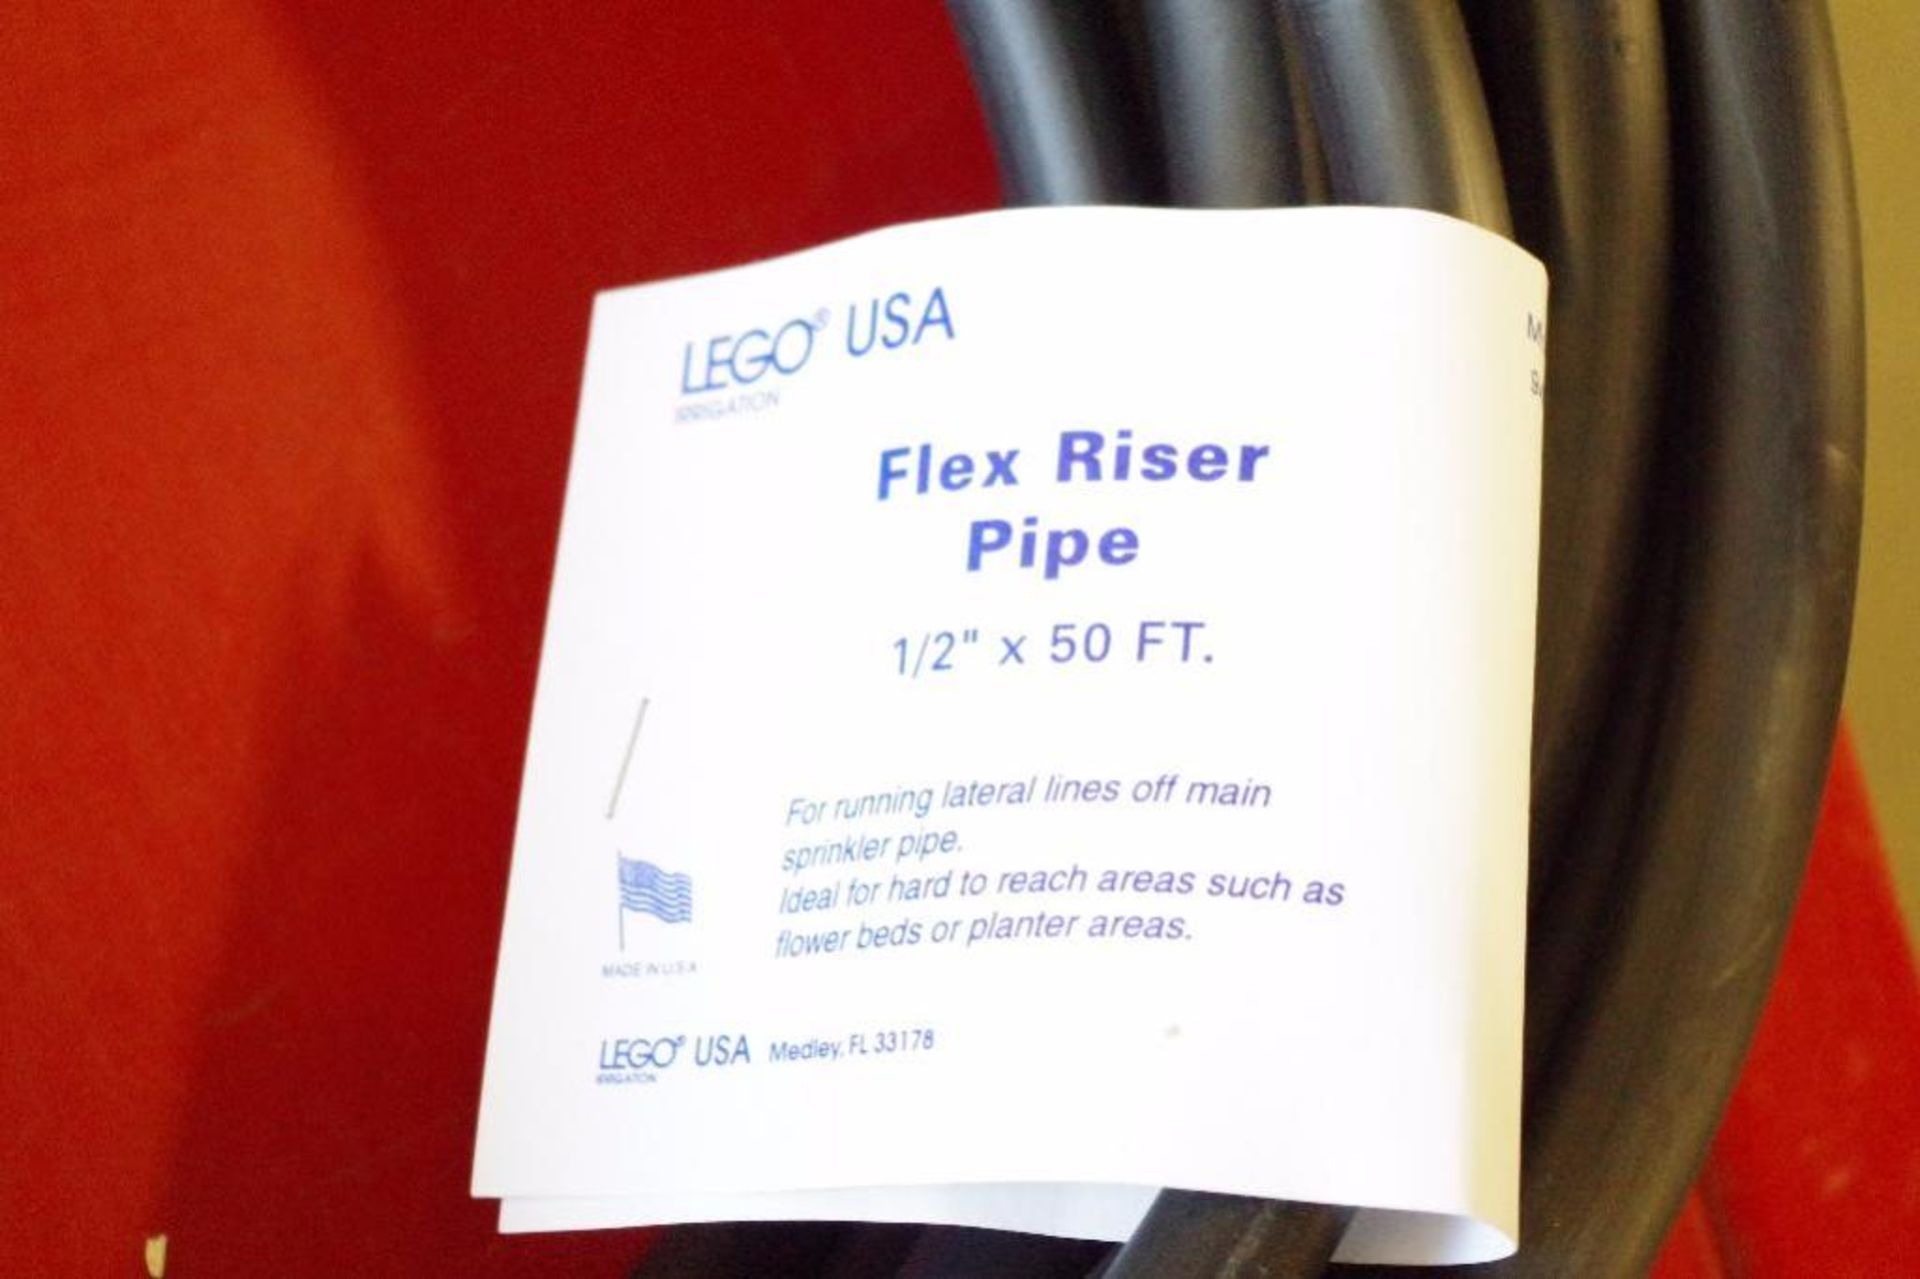 [3] UNUSED LEGO USA 1/2" x 50' Flex Riser Pipe Rolls, Made in USA - Image 3 of 3